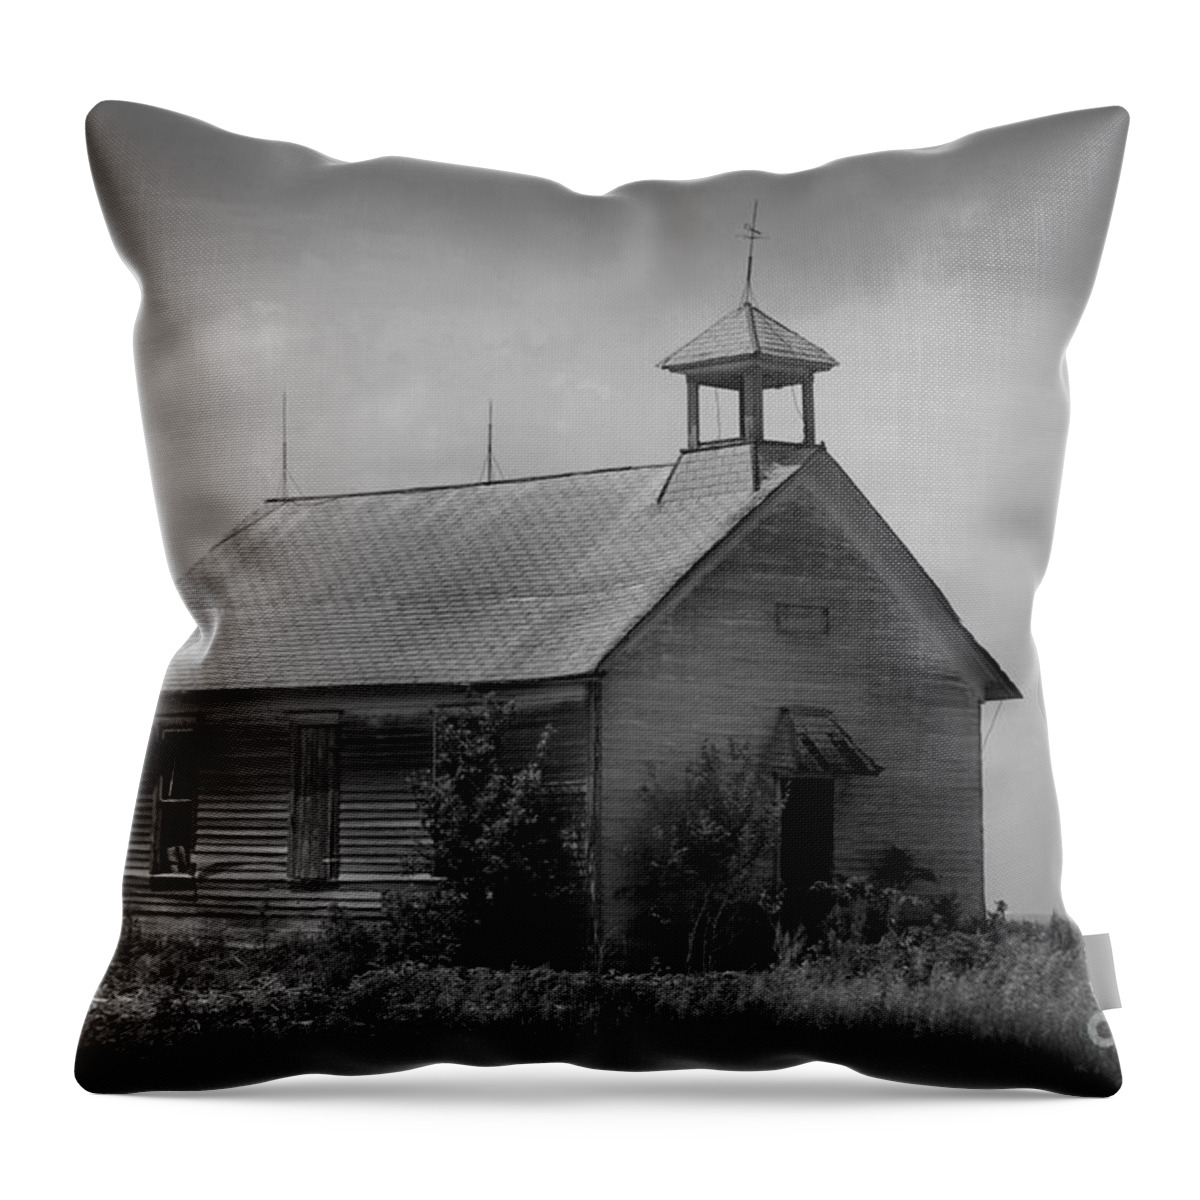 Abandoned Schoolhouse Throw Pillow featuring the photograph Abandoned Schoolhouse by E B Schmidt